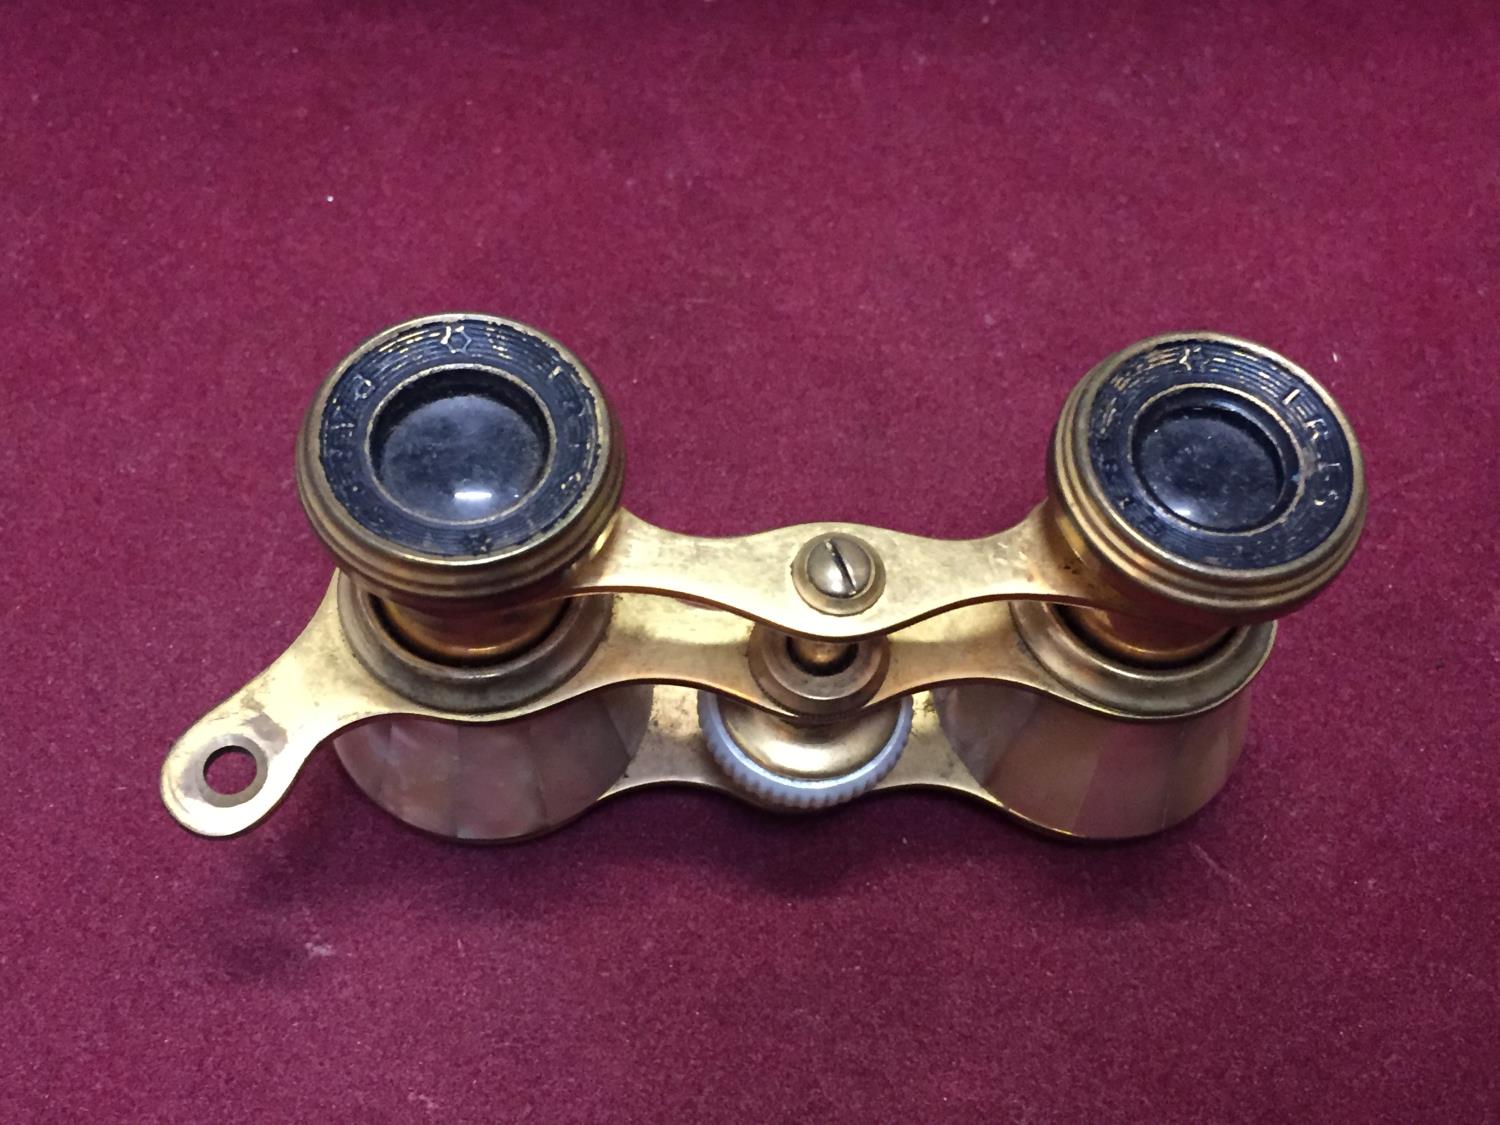 A PAIR OF BRASS AND MOTHER OF PEARL OPERA GLASSES - Image 2 of 4